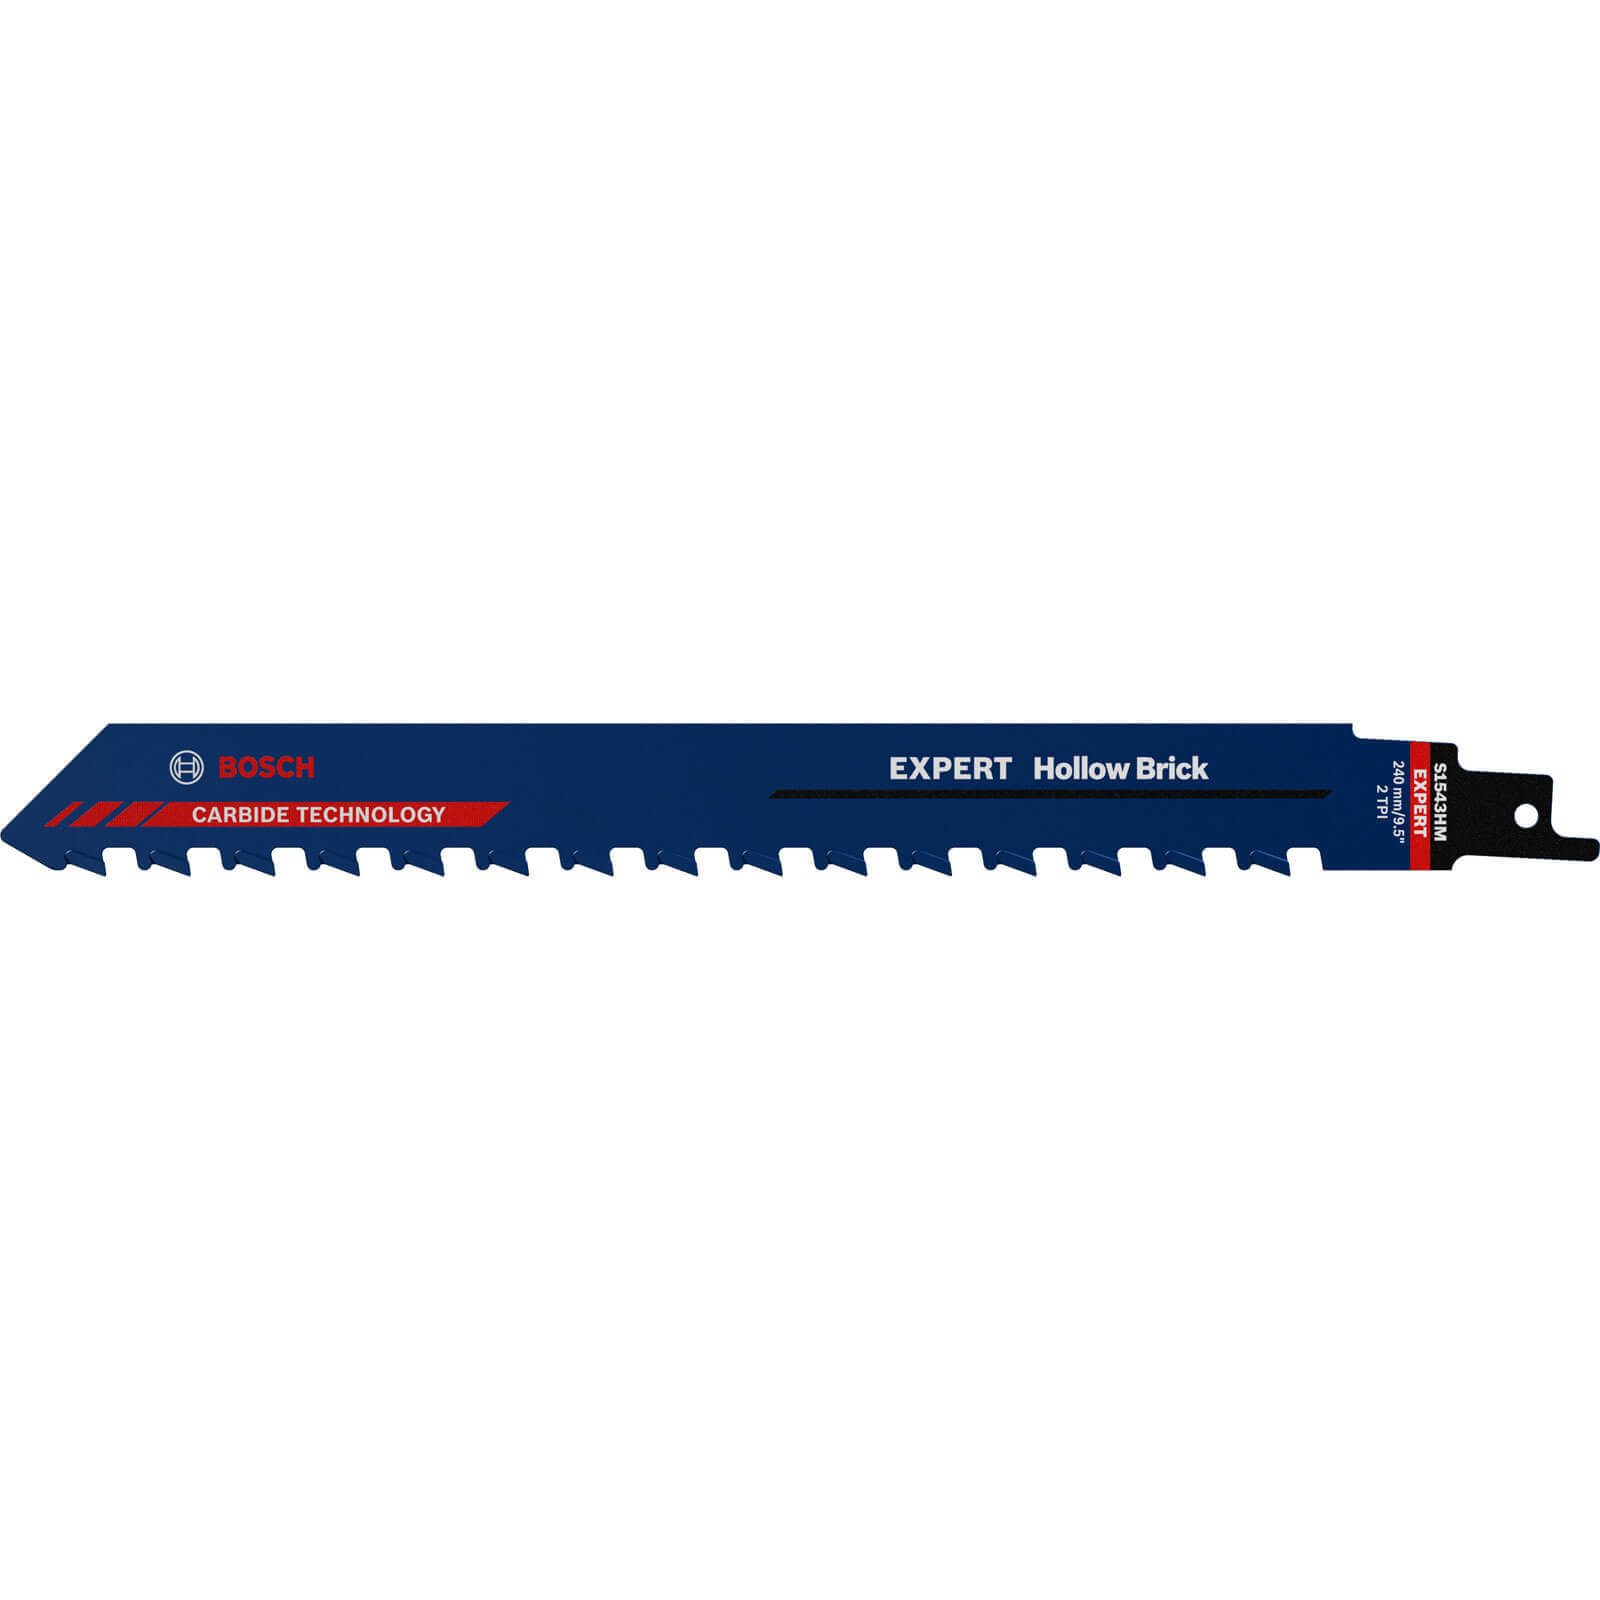 Bosch Expert S1543HM Hollow Brick Reciprocating Saw Blades 240mm Pack of 1